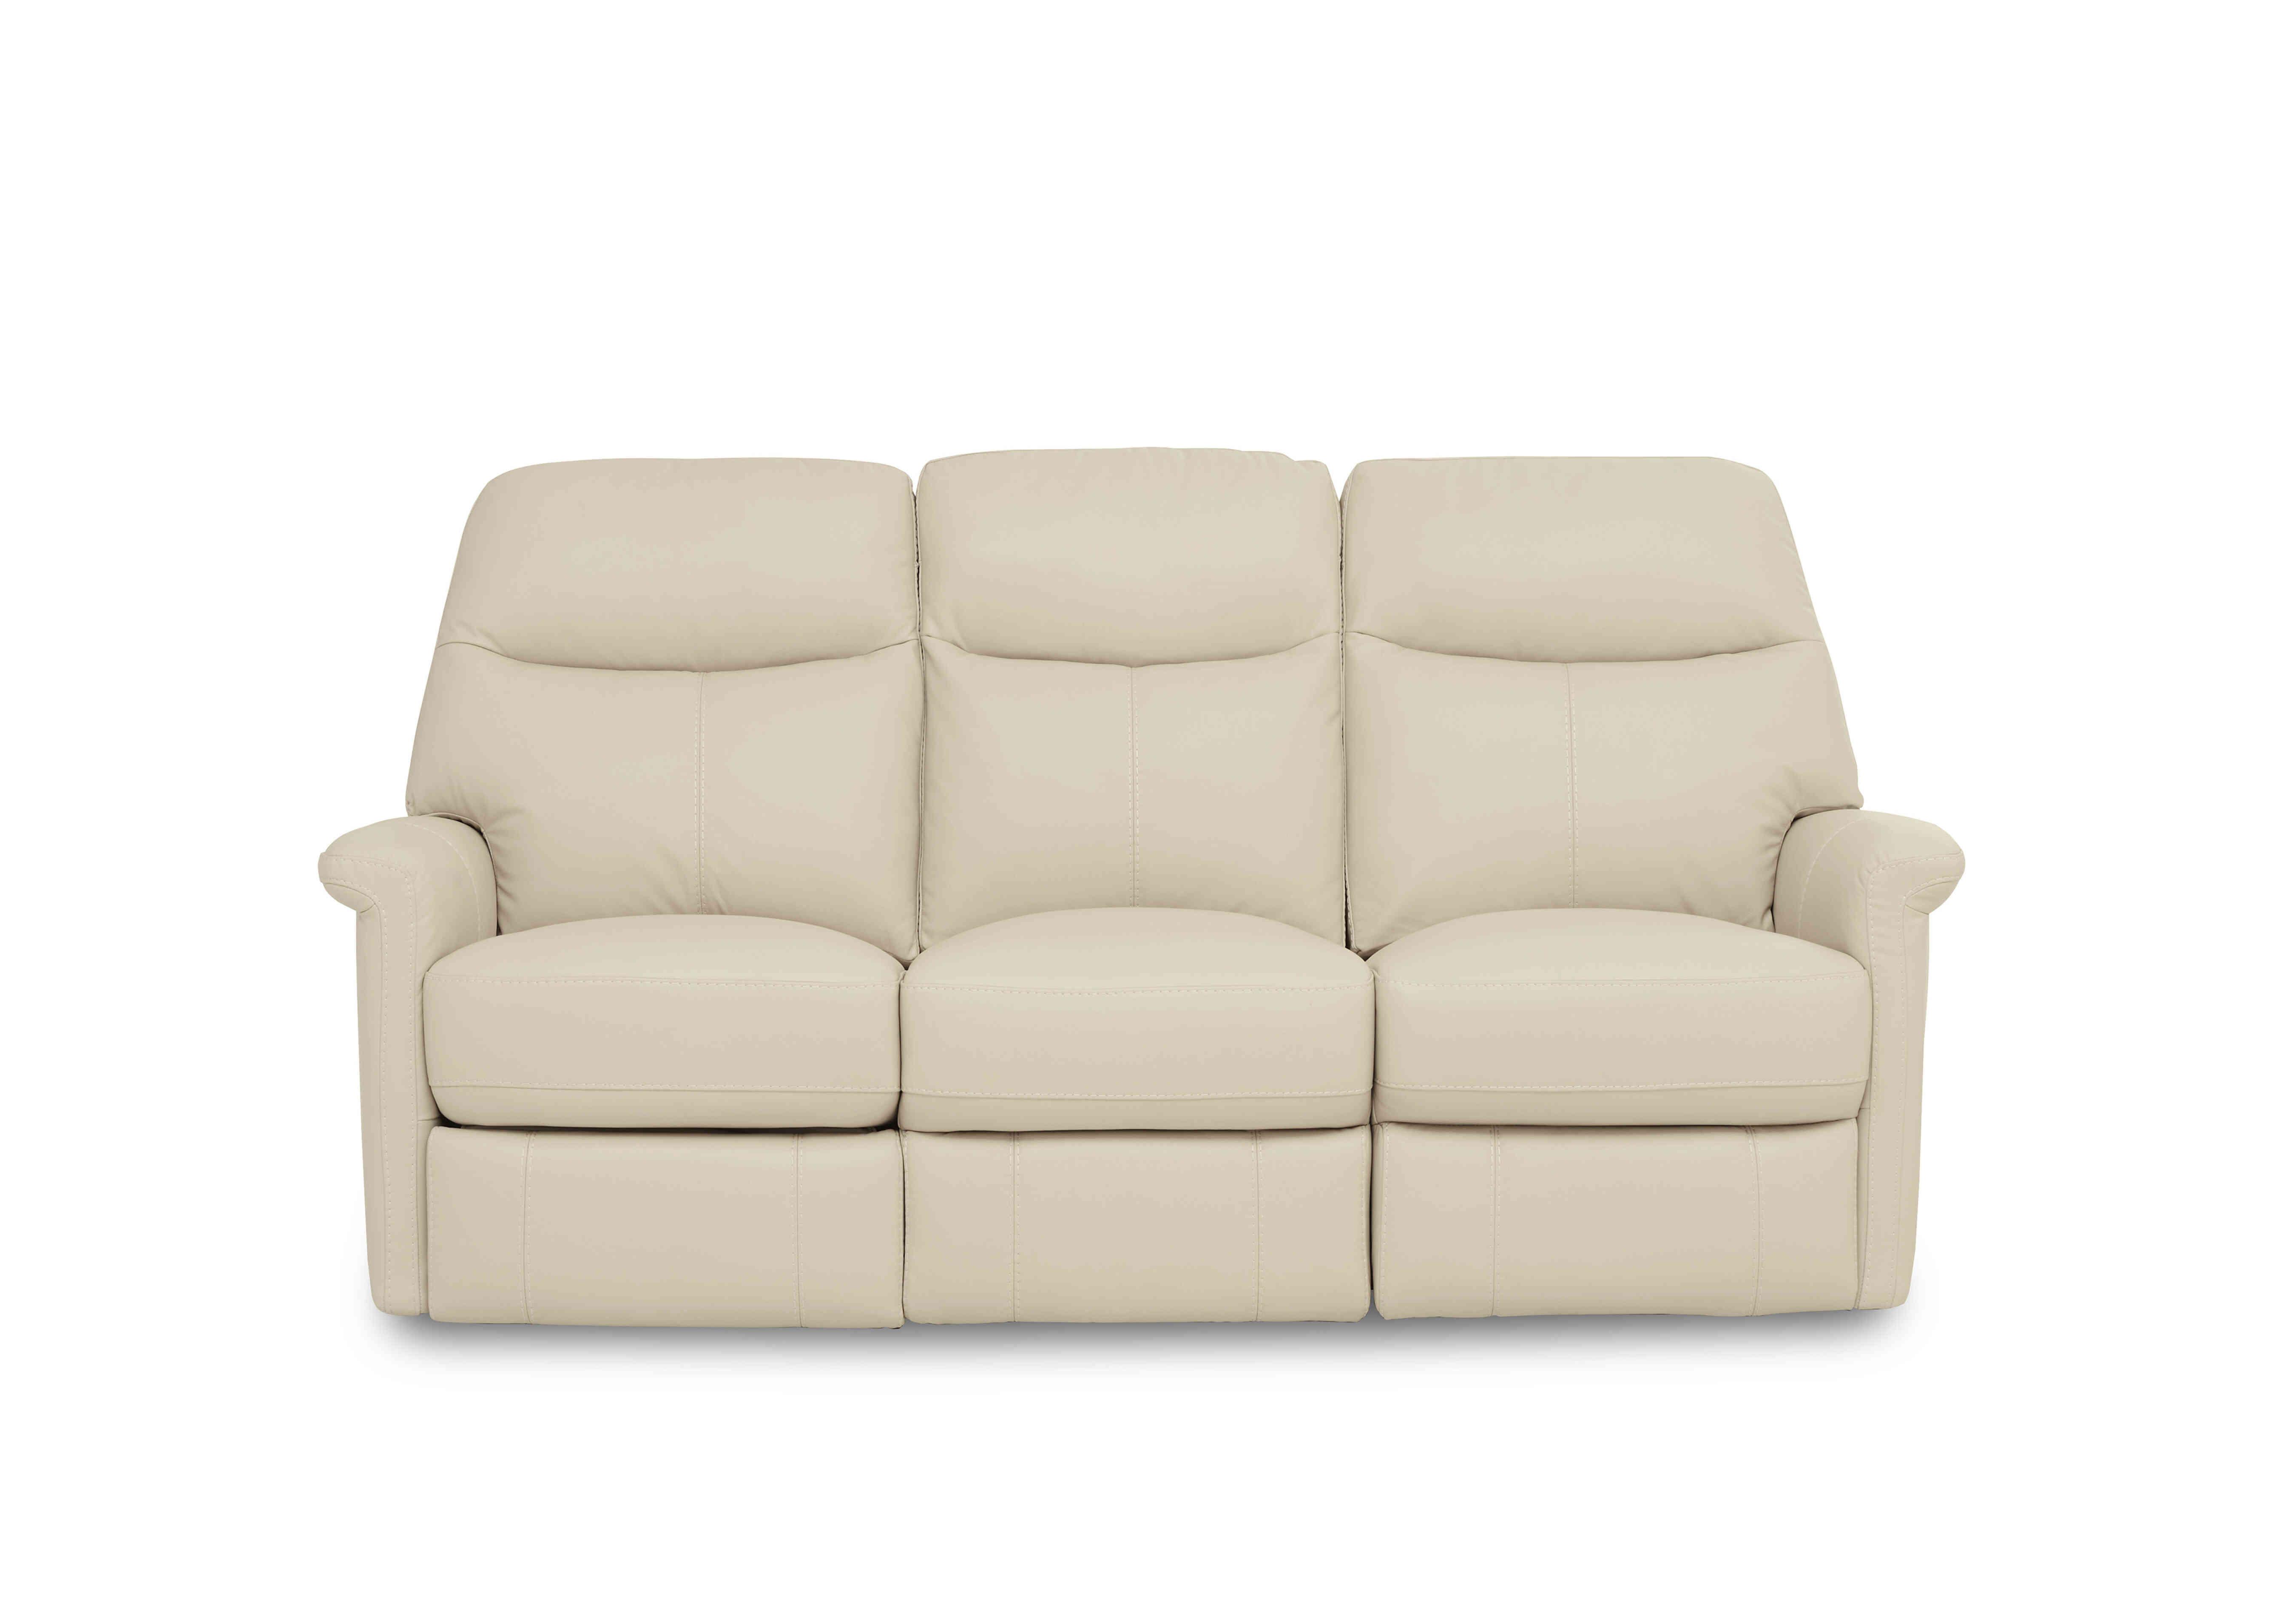 Compact Collection Lille 3 Seater Leather Sofa in Bv-862c Bisque on Furniture Village